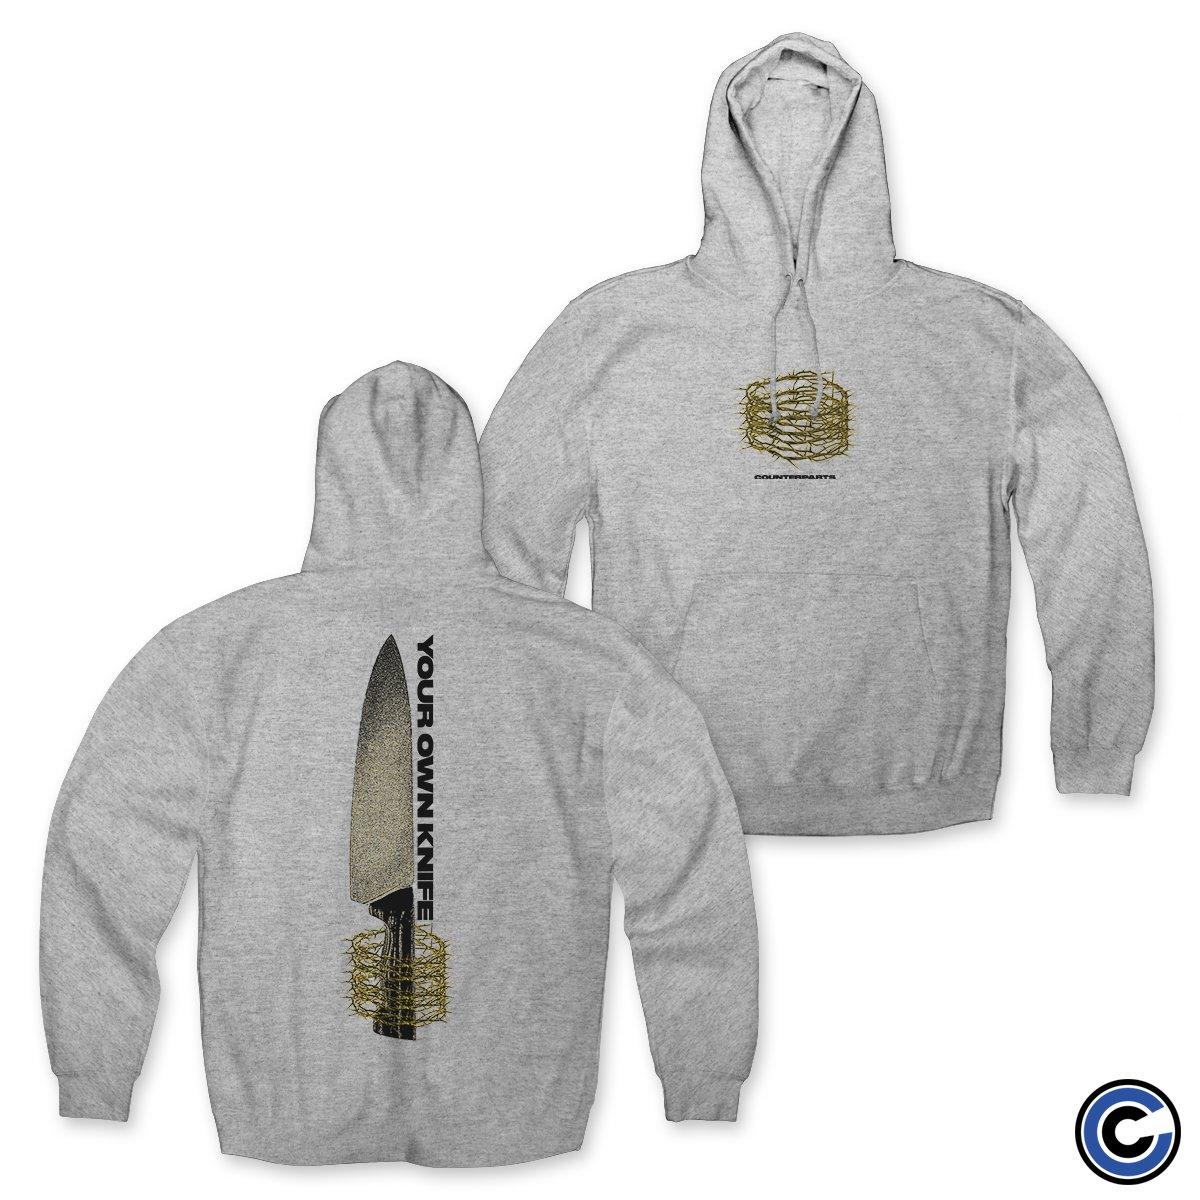 Knife Makers Are Never Dull' Men's Hoodie